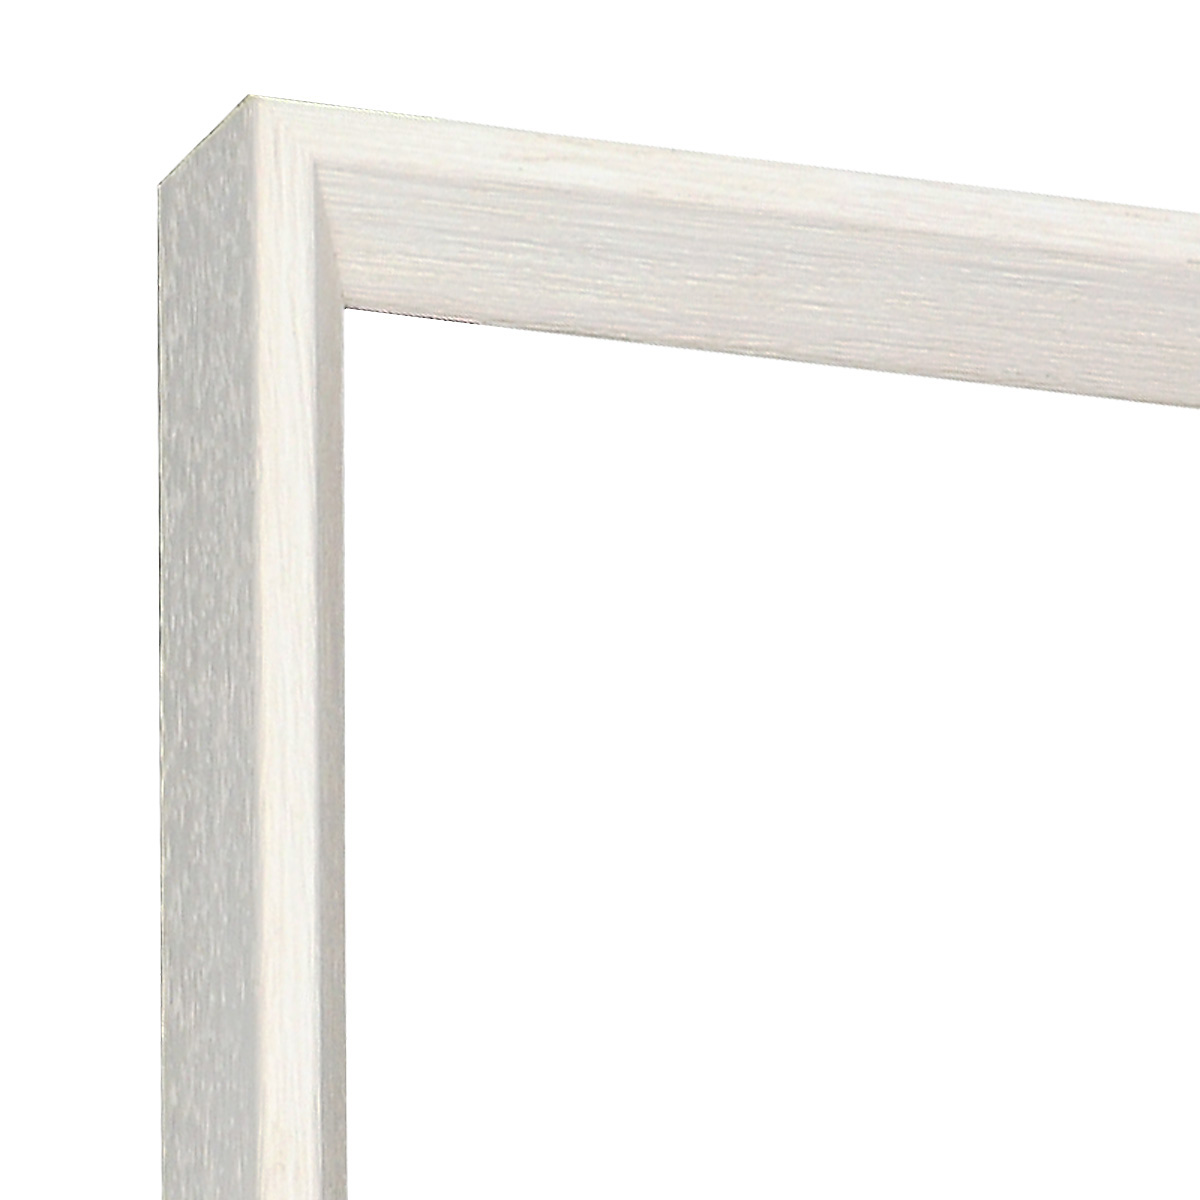 Moulding ayous 25mm height, 14mm width, white - Corner